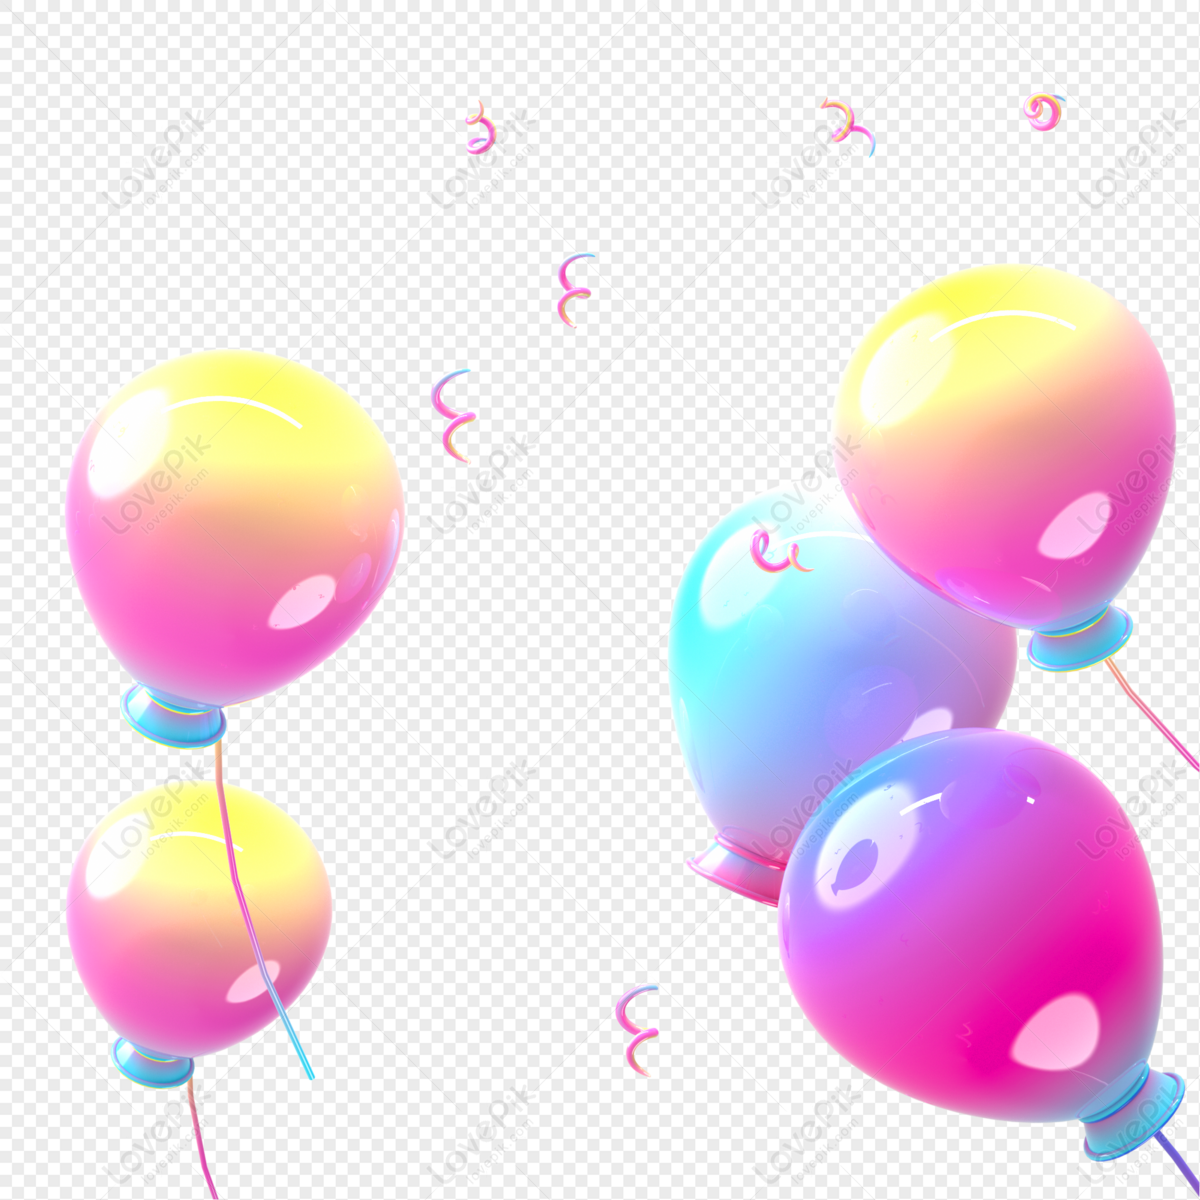 Floating Balloon PNG Picture And Clipart Image For Free Download - Lovepik  | 401209095